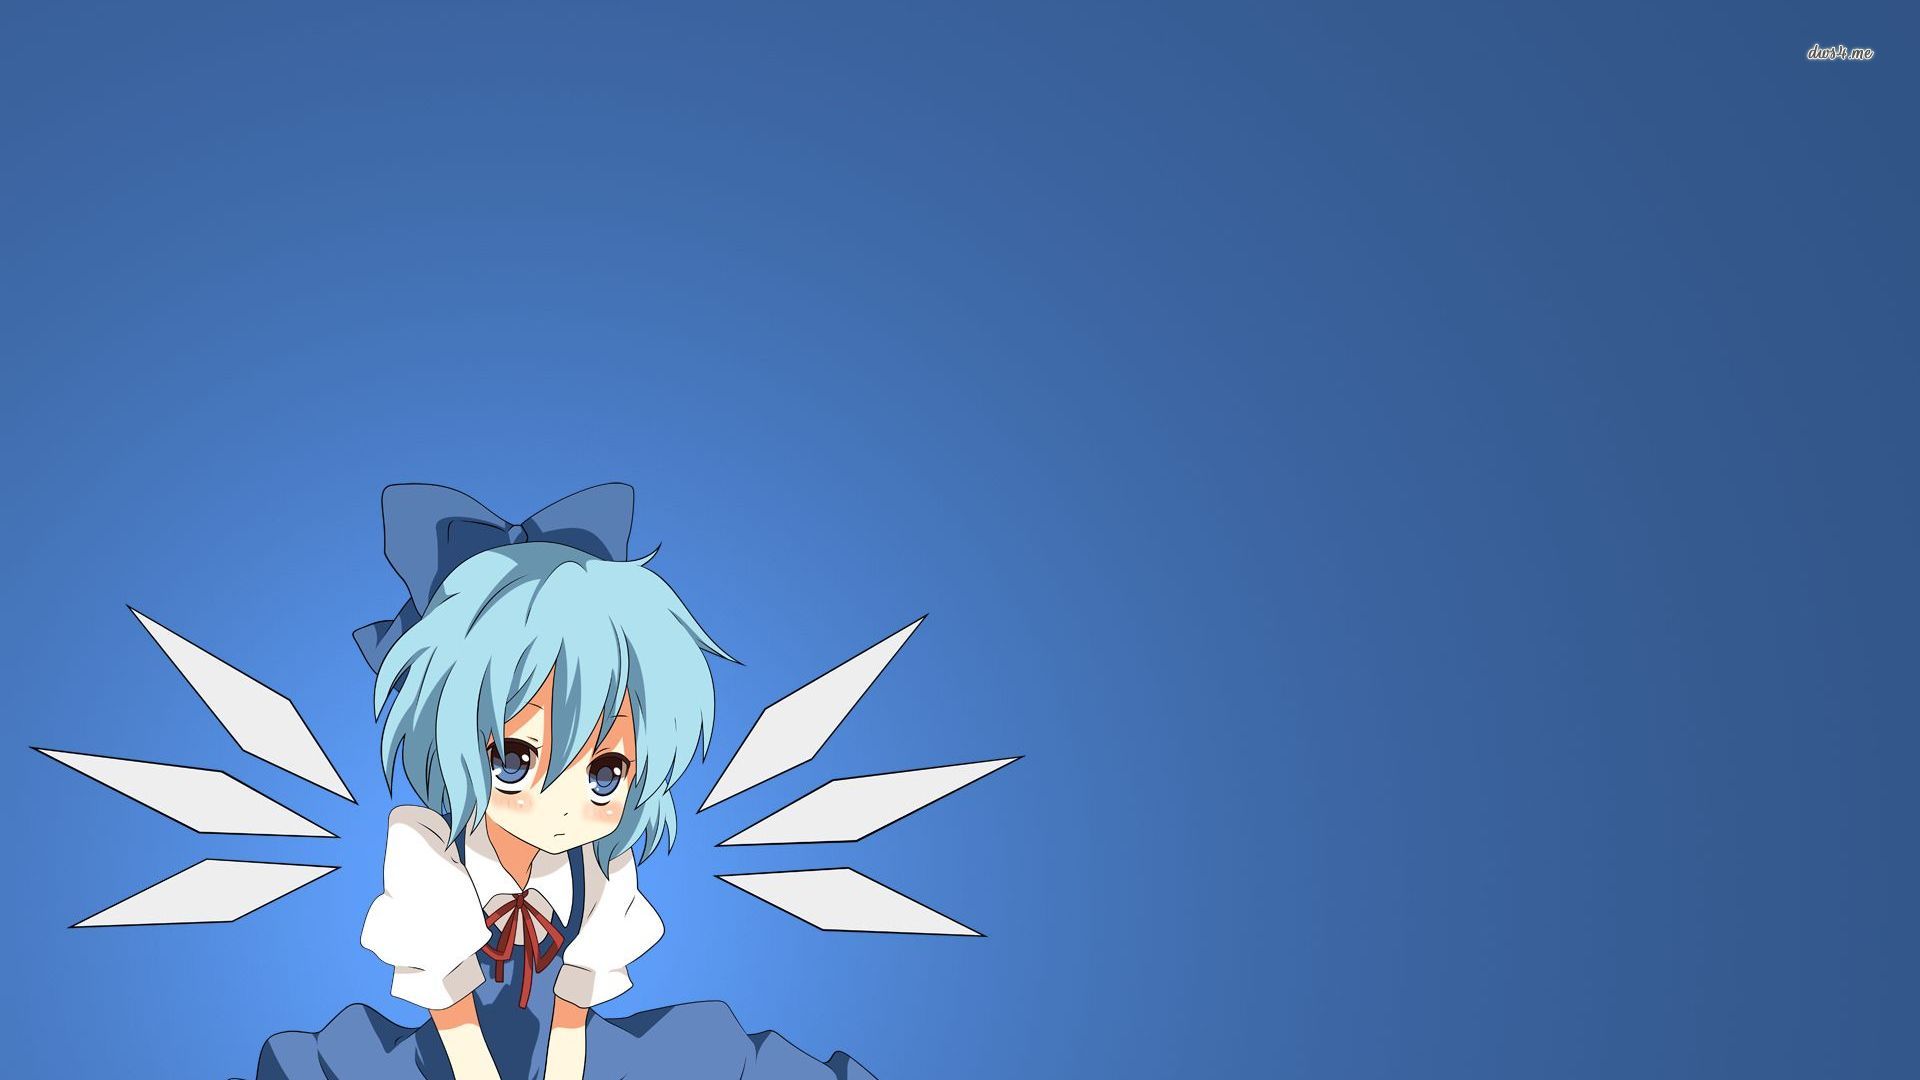 Cirno - Touhou Project wallpaper - Anime wallpapers